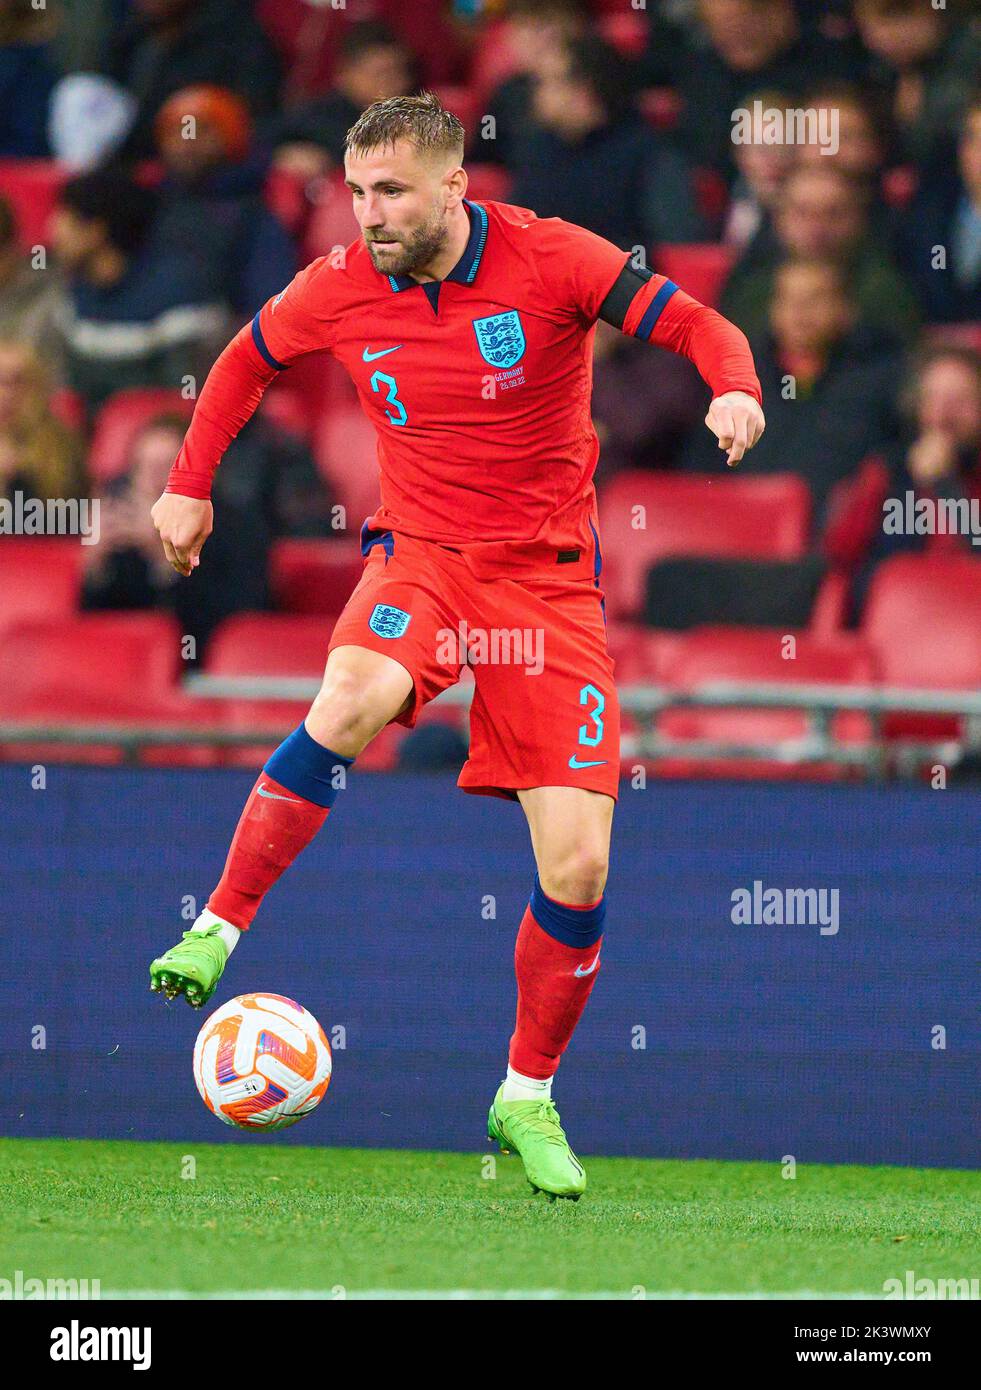 Luke Shaw, England 3  in the UEFA Nations League 2022 match  ENGLAND - GERMANY 3-3  in Season 2022/2023 on Sept 26, 2022  in London, Great Britain.  © Peter Schatz / Alamy Live News Stock Photo